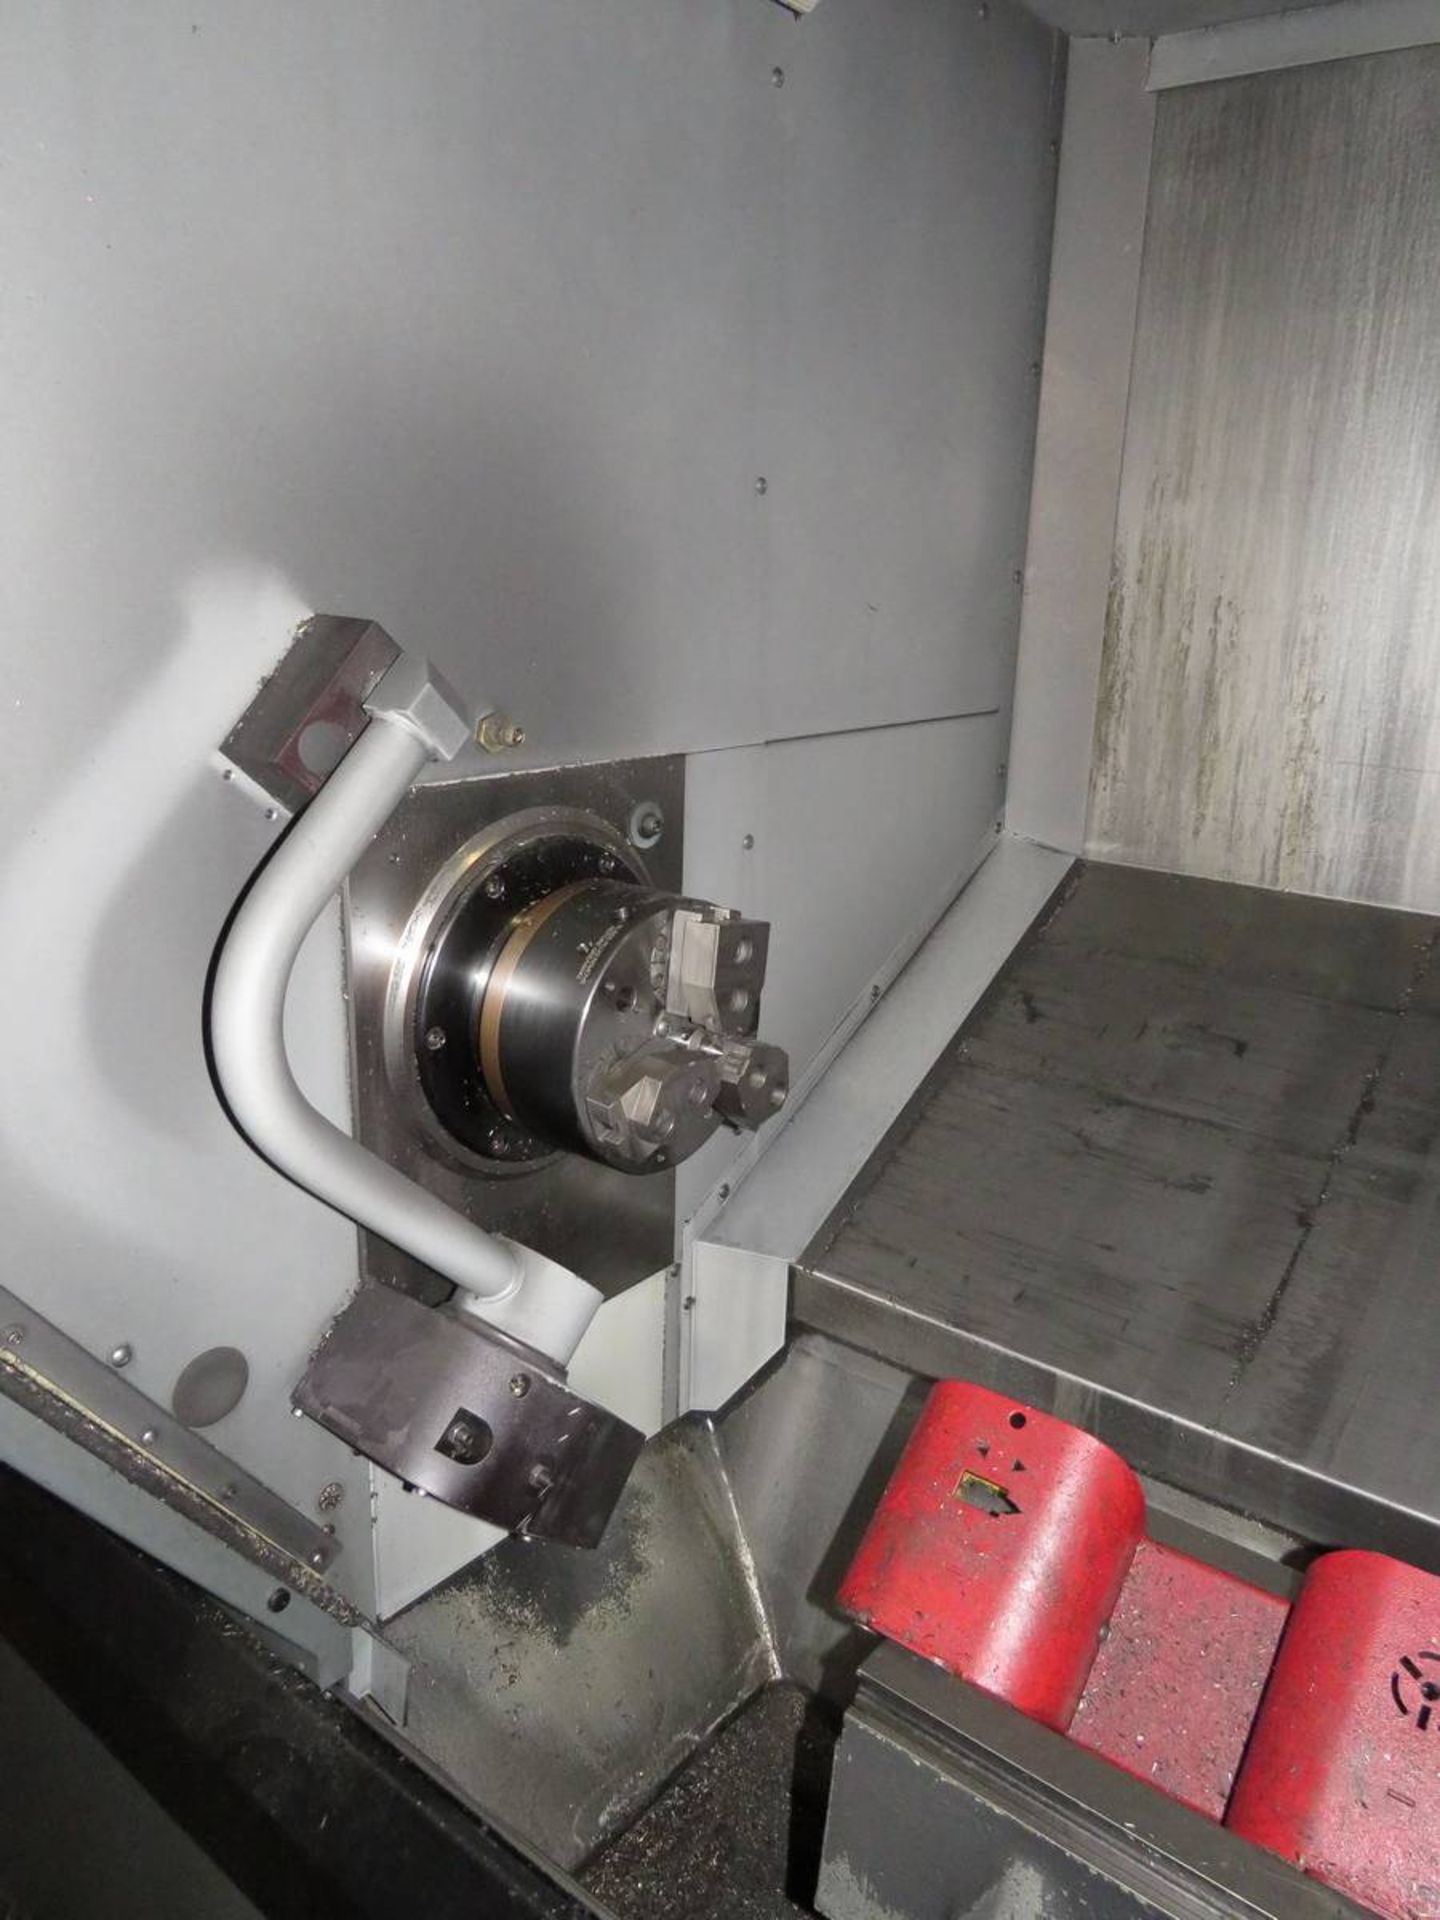 2017 Haas ST-30 CNC Turning Center - Image 5 of 9